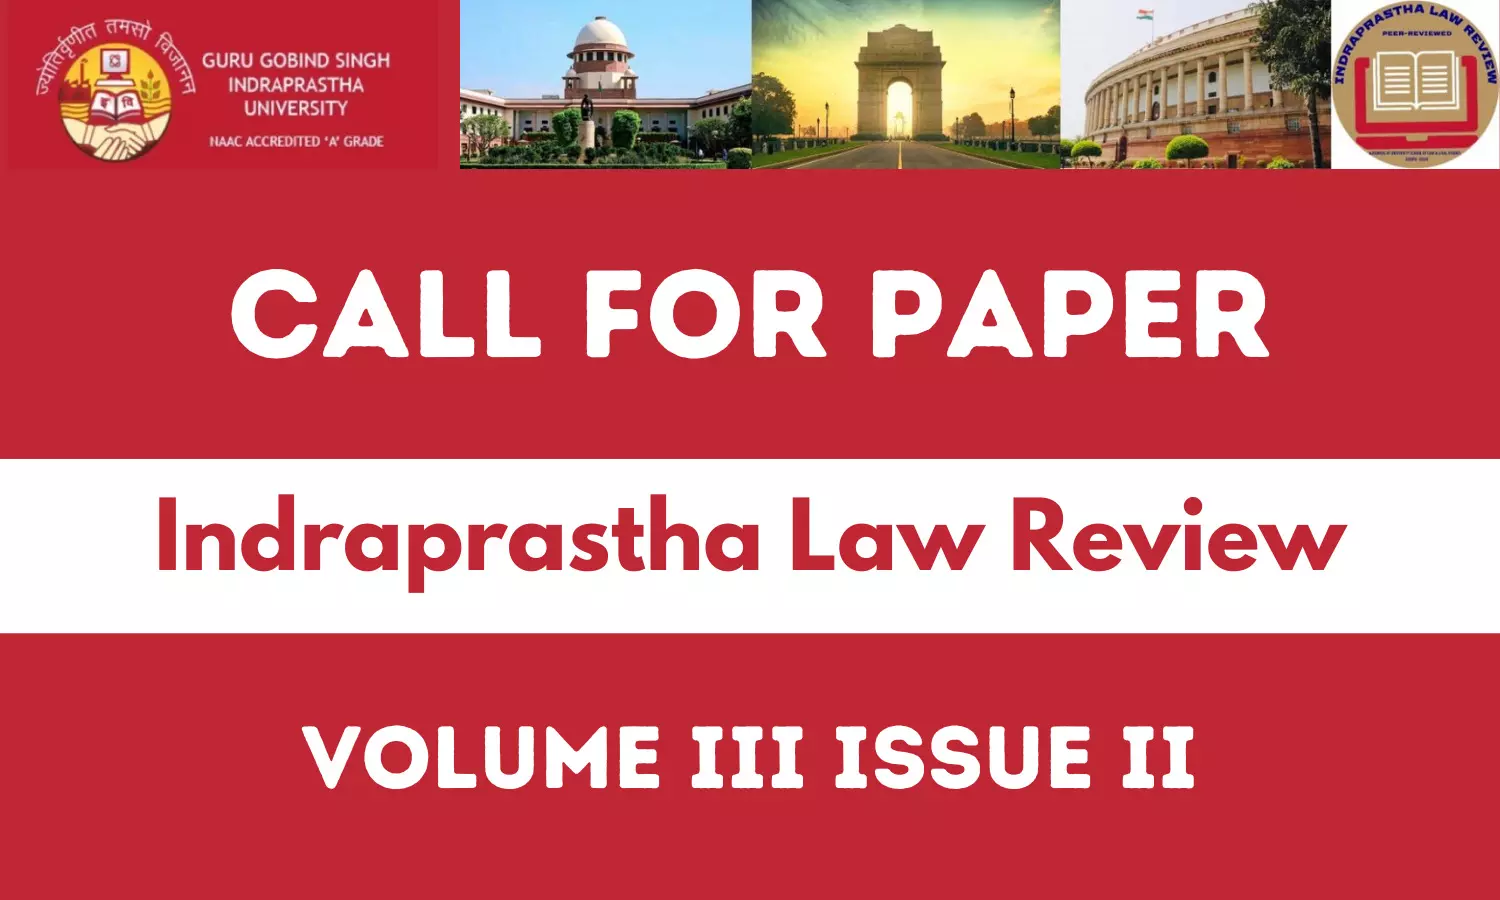 Call for Papers | Indraprastha Law Review Winter 2022 Vol III Issue II | USLLS, GGSIPU | Deadline - January 30th, 2023